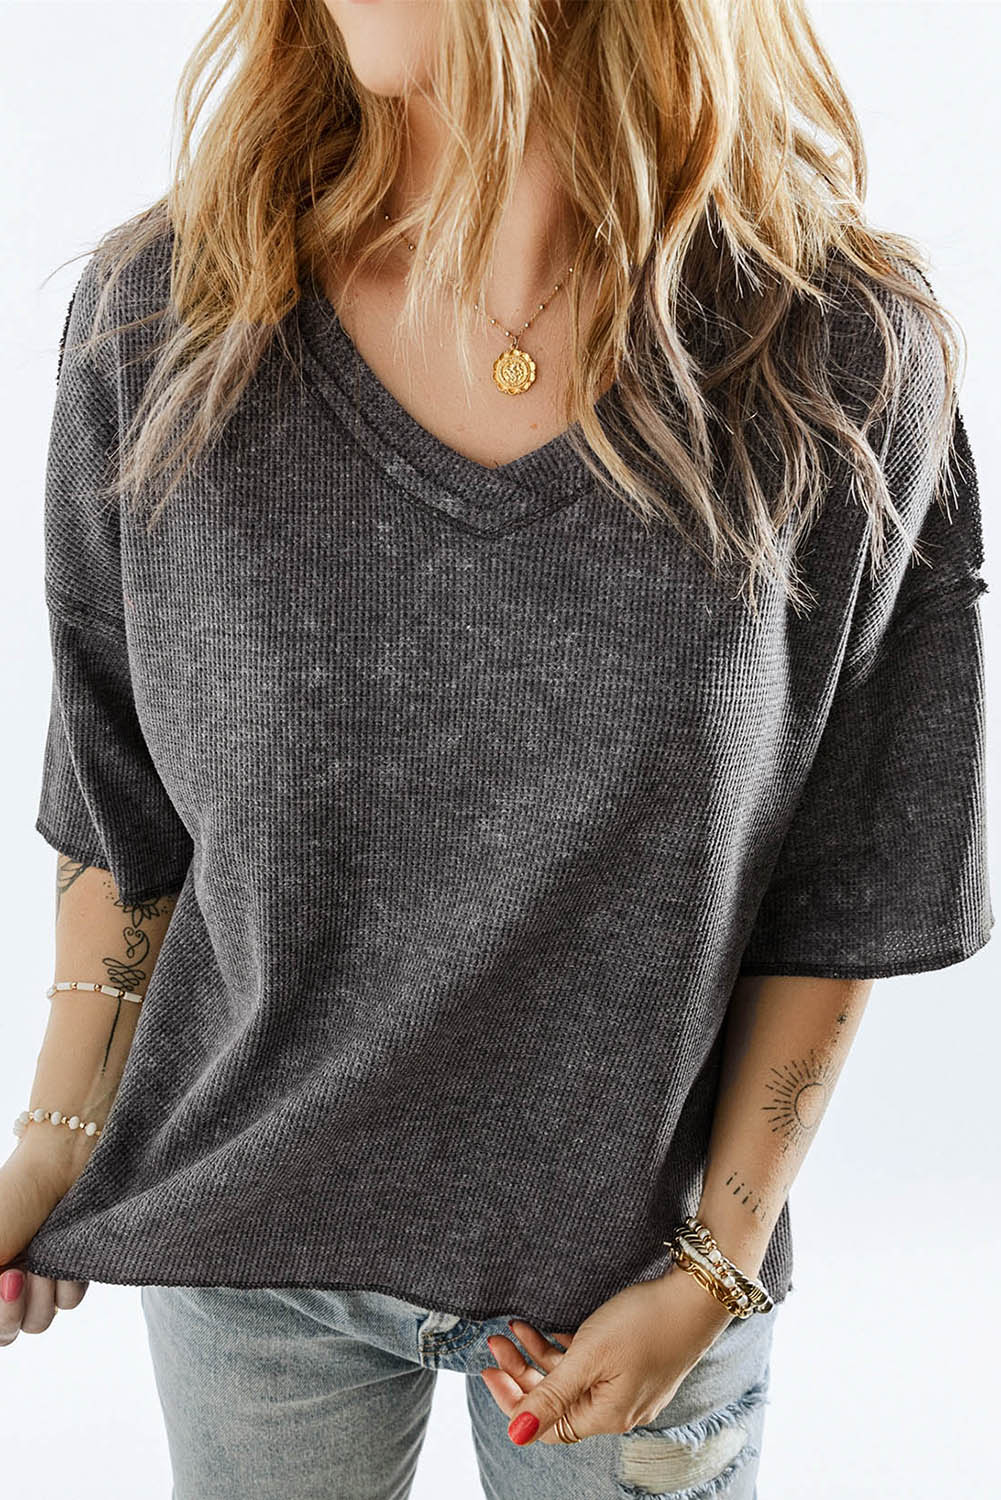 Dark Slate Gray V-Neck Dropped Shoulder Tee Sentient Beauty Fashions Apparel & Accessories